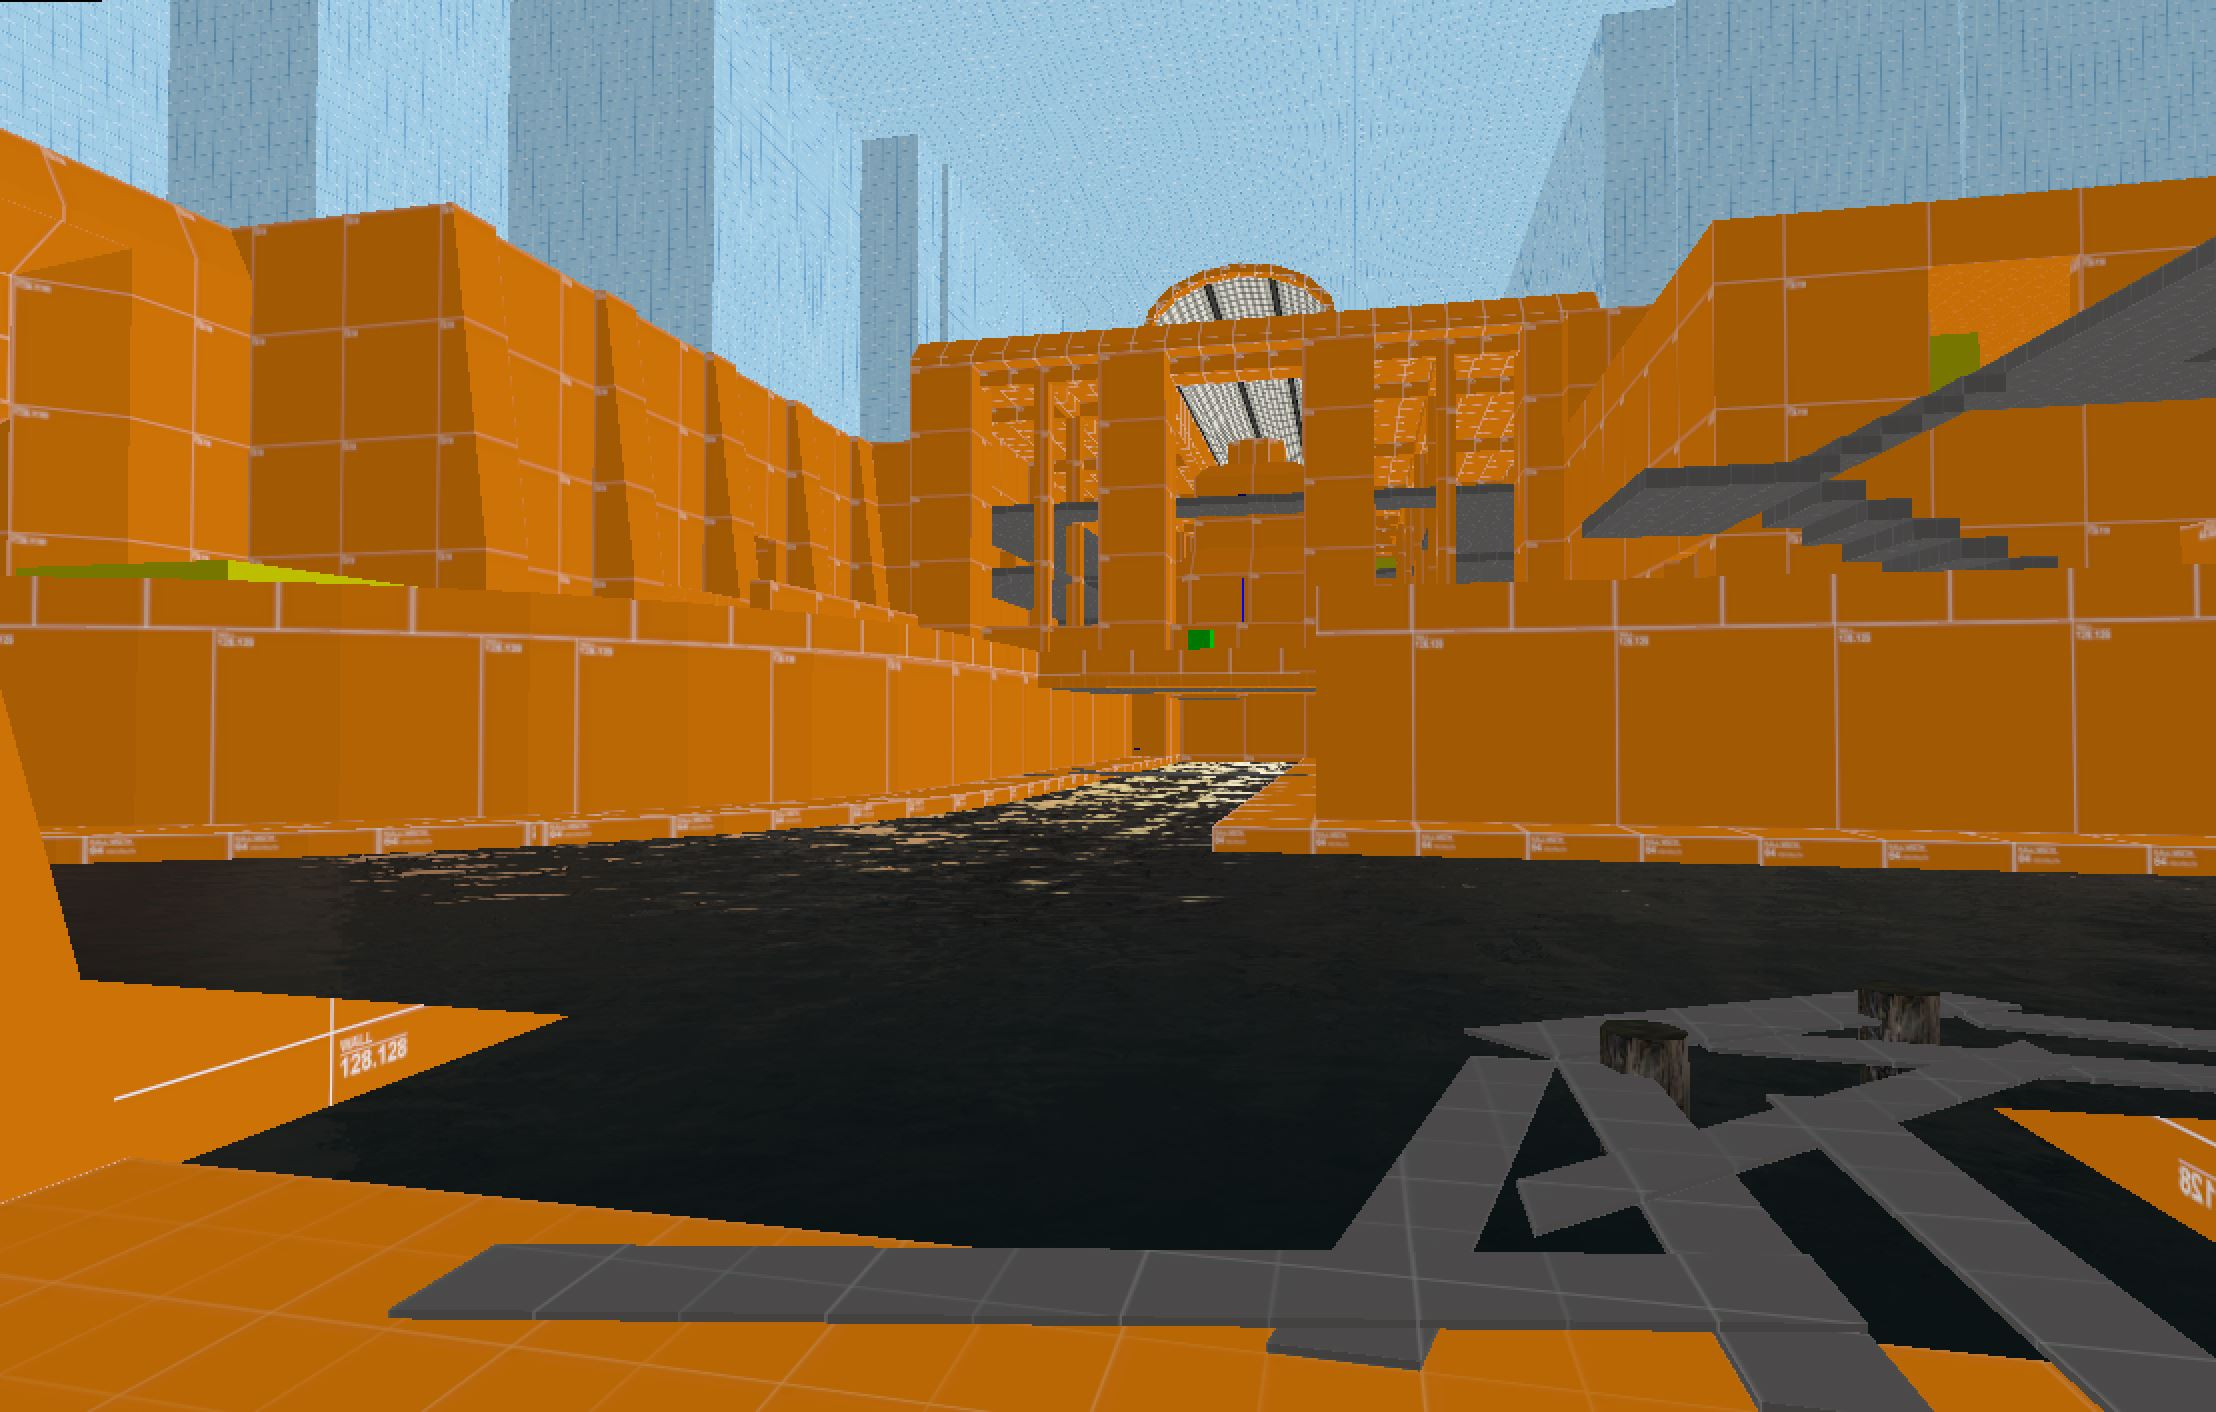 A blockout screenshot of the central exterior location featured in the map.